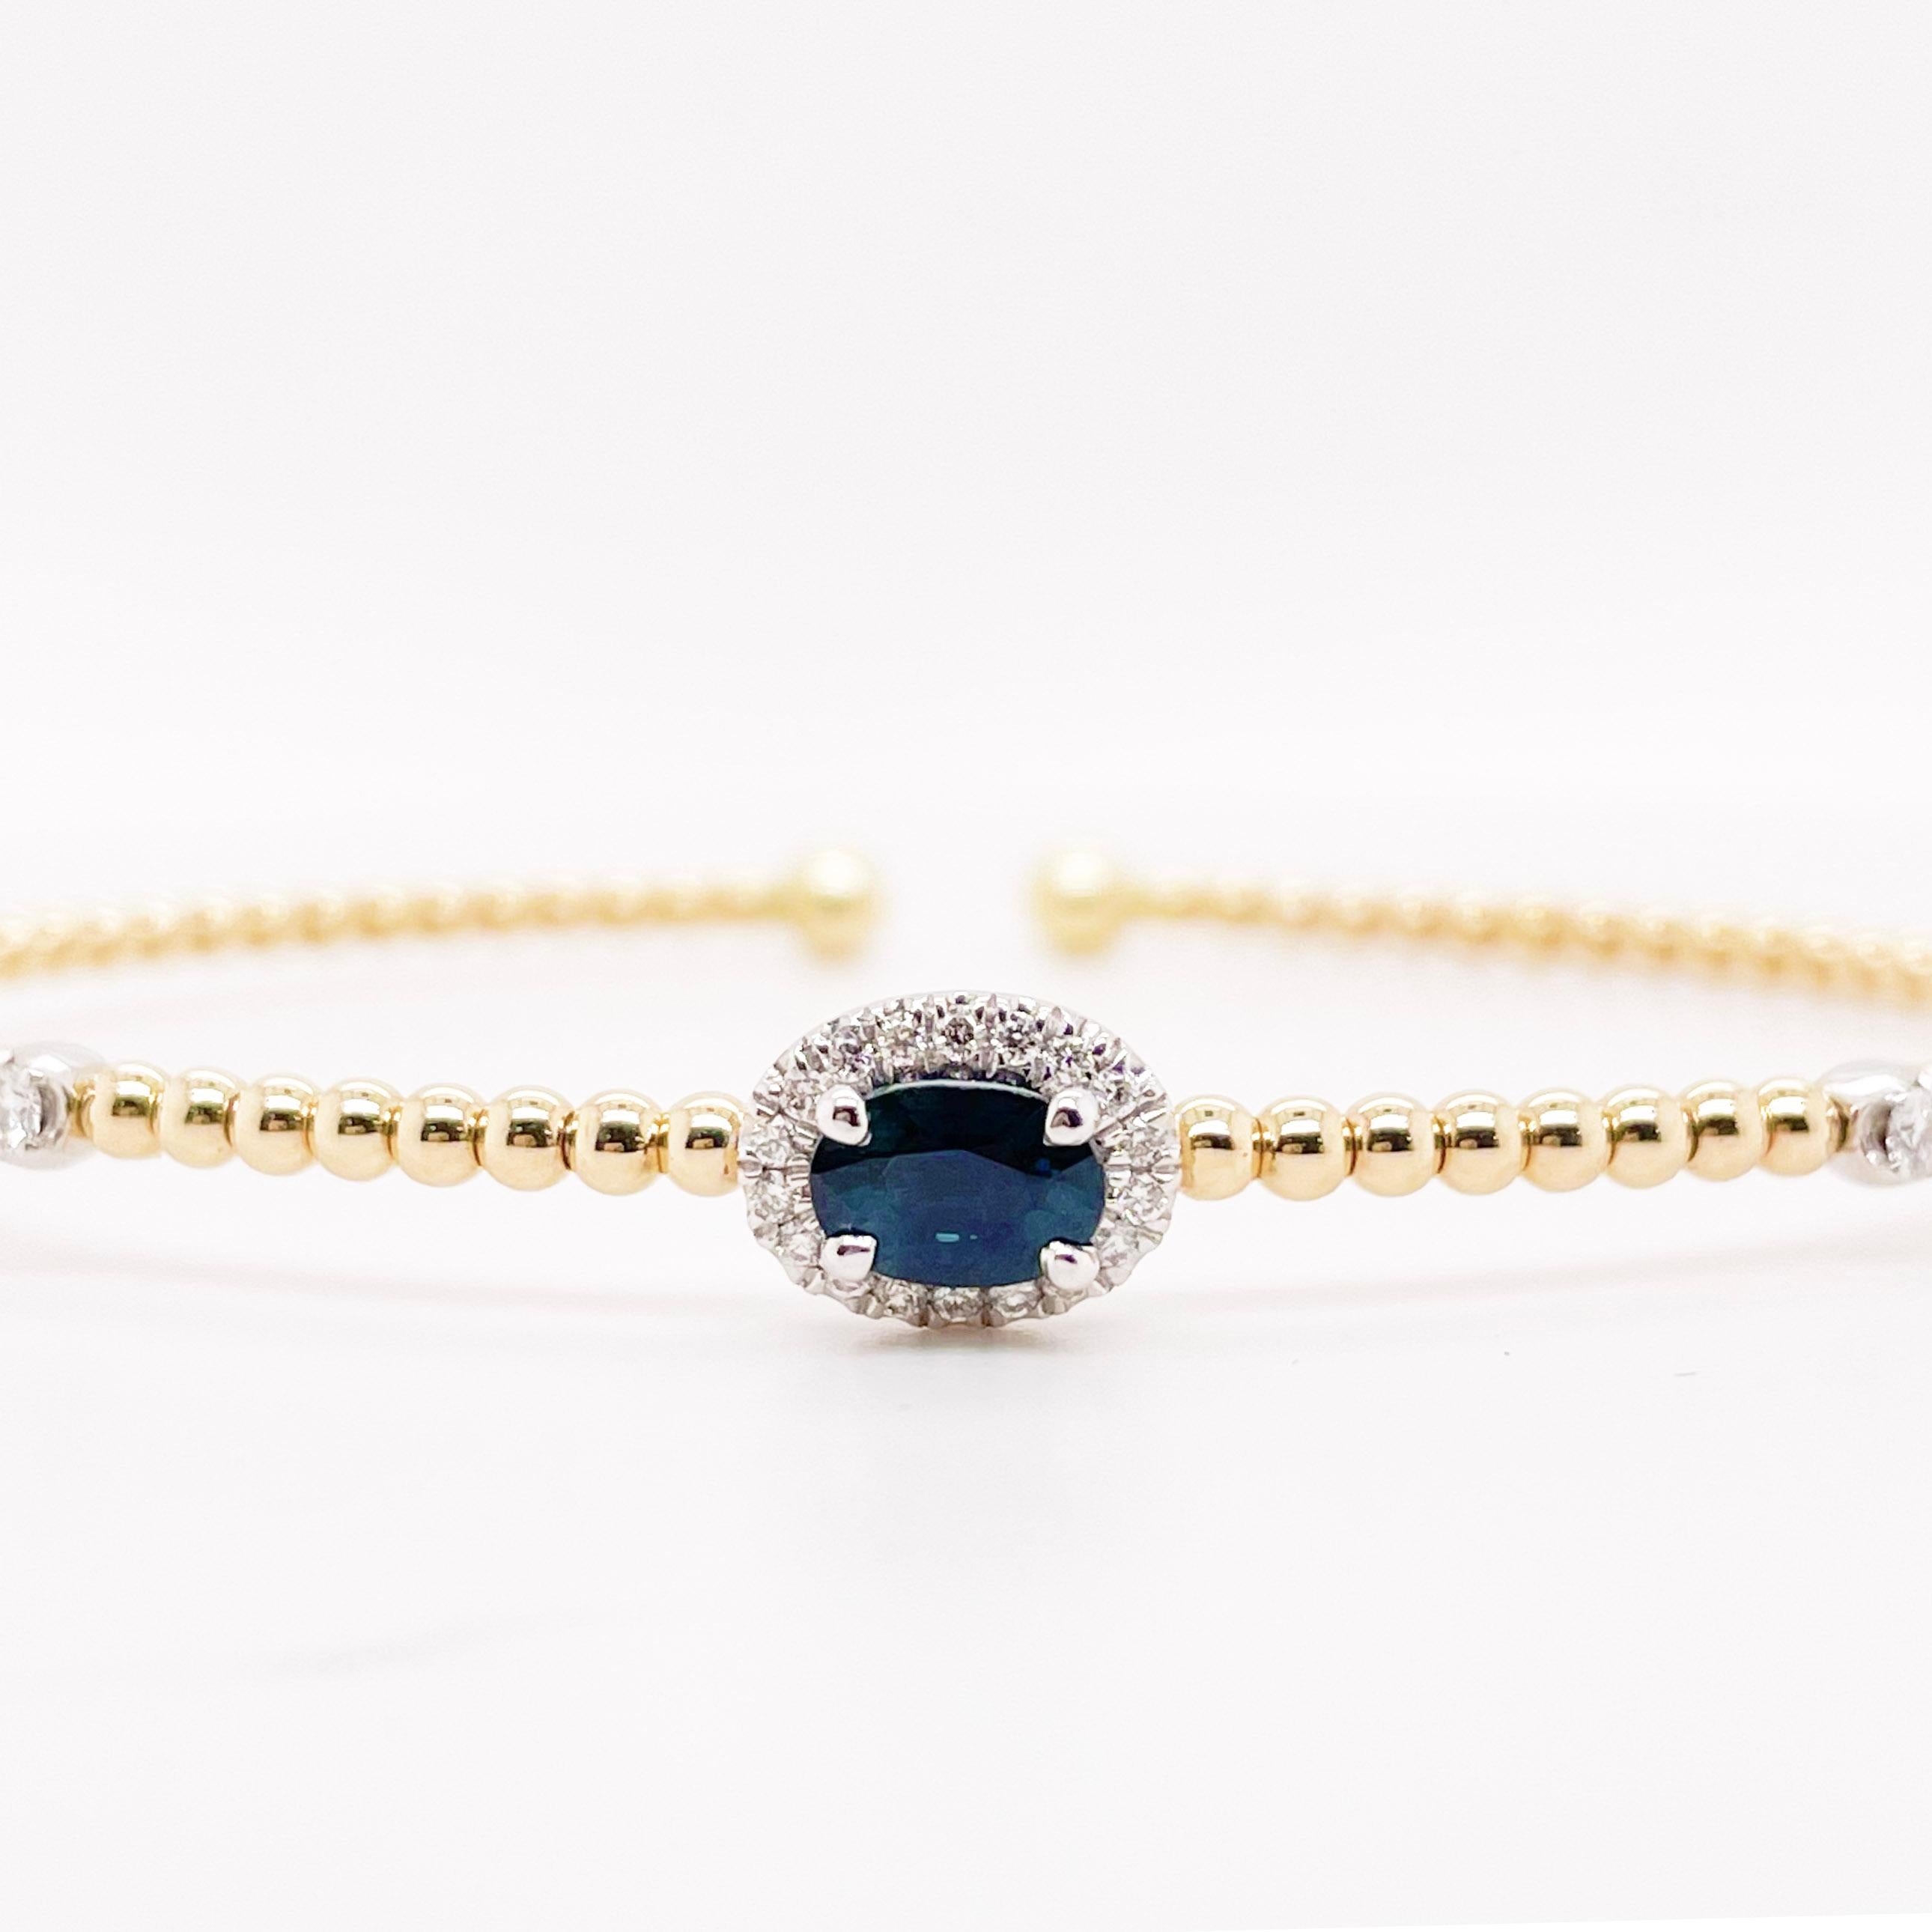 This flexible bracelet is perfect on any wrist. The flex style makes it possible to open the bracelet up and the patented design wraps around your wrist. This bracelet has an oval sapphire surrounded by diamonds set in 14 karat white gold.  The